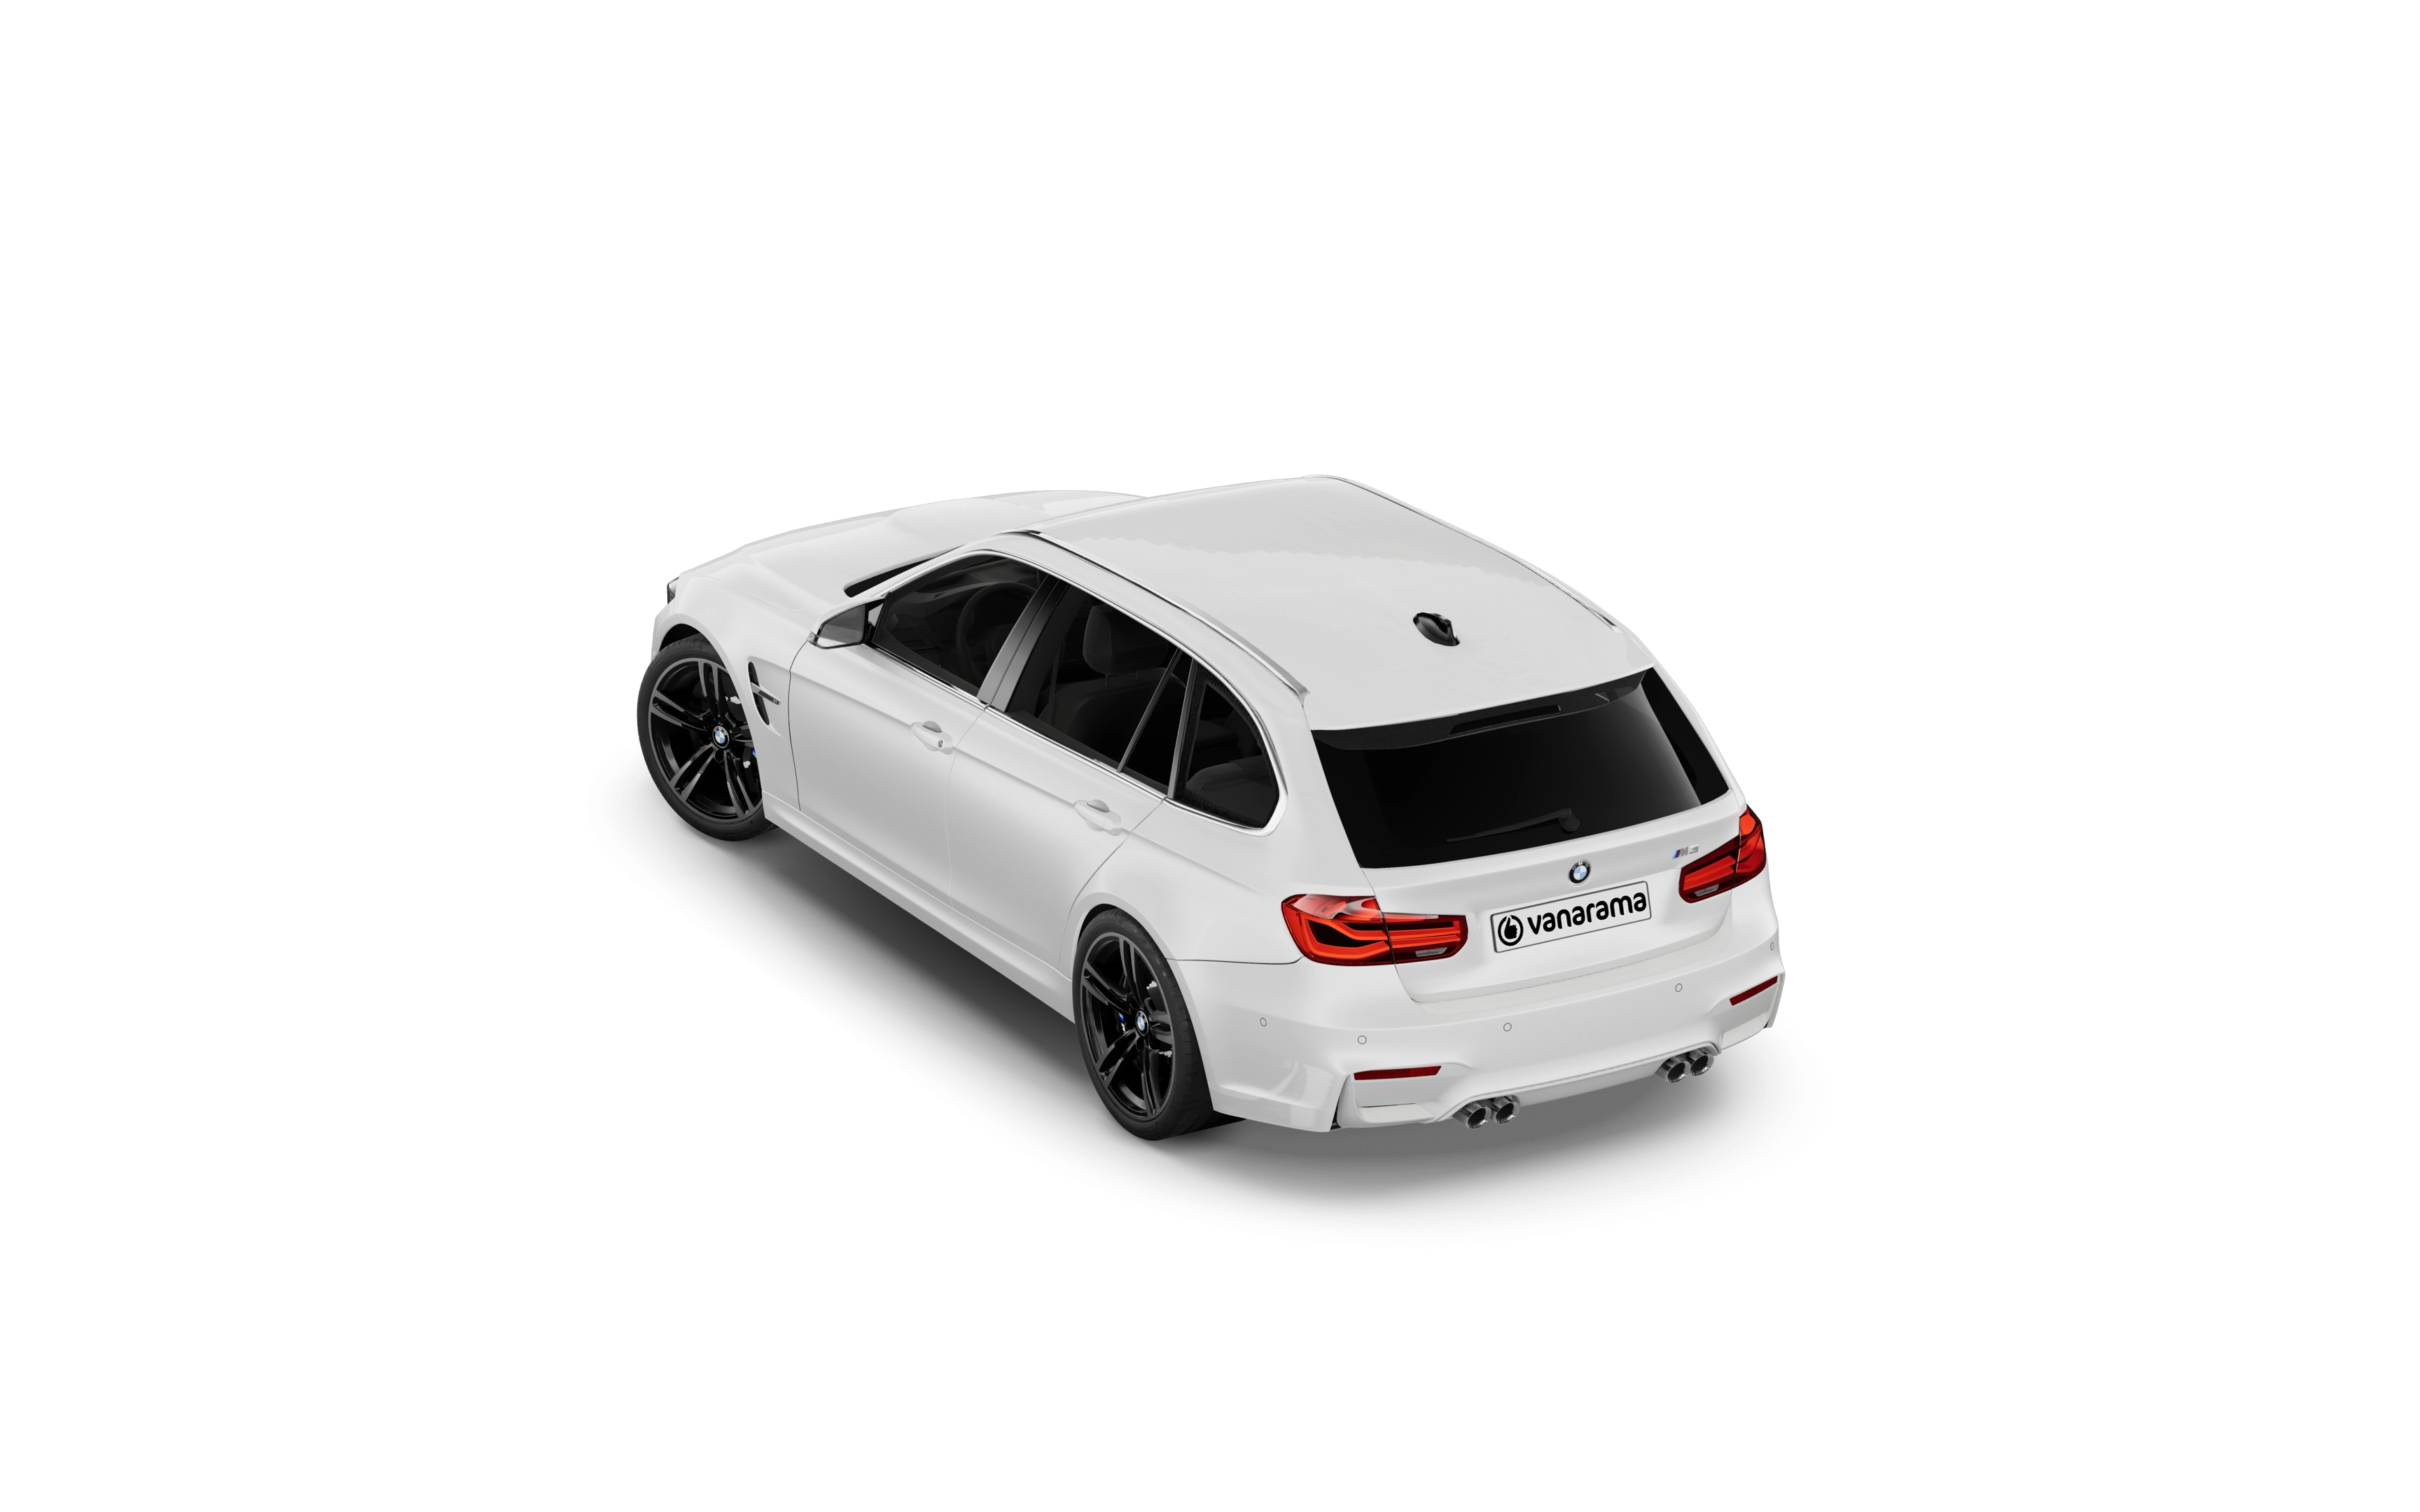 Bmw m3 touring m3 xdrive competition m 5 doors step auto [ultimat pk]